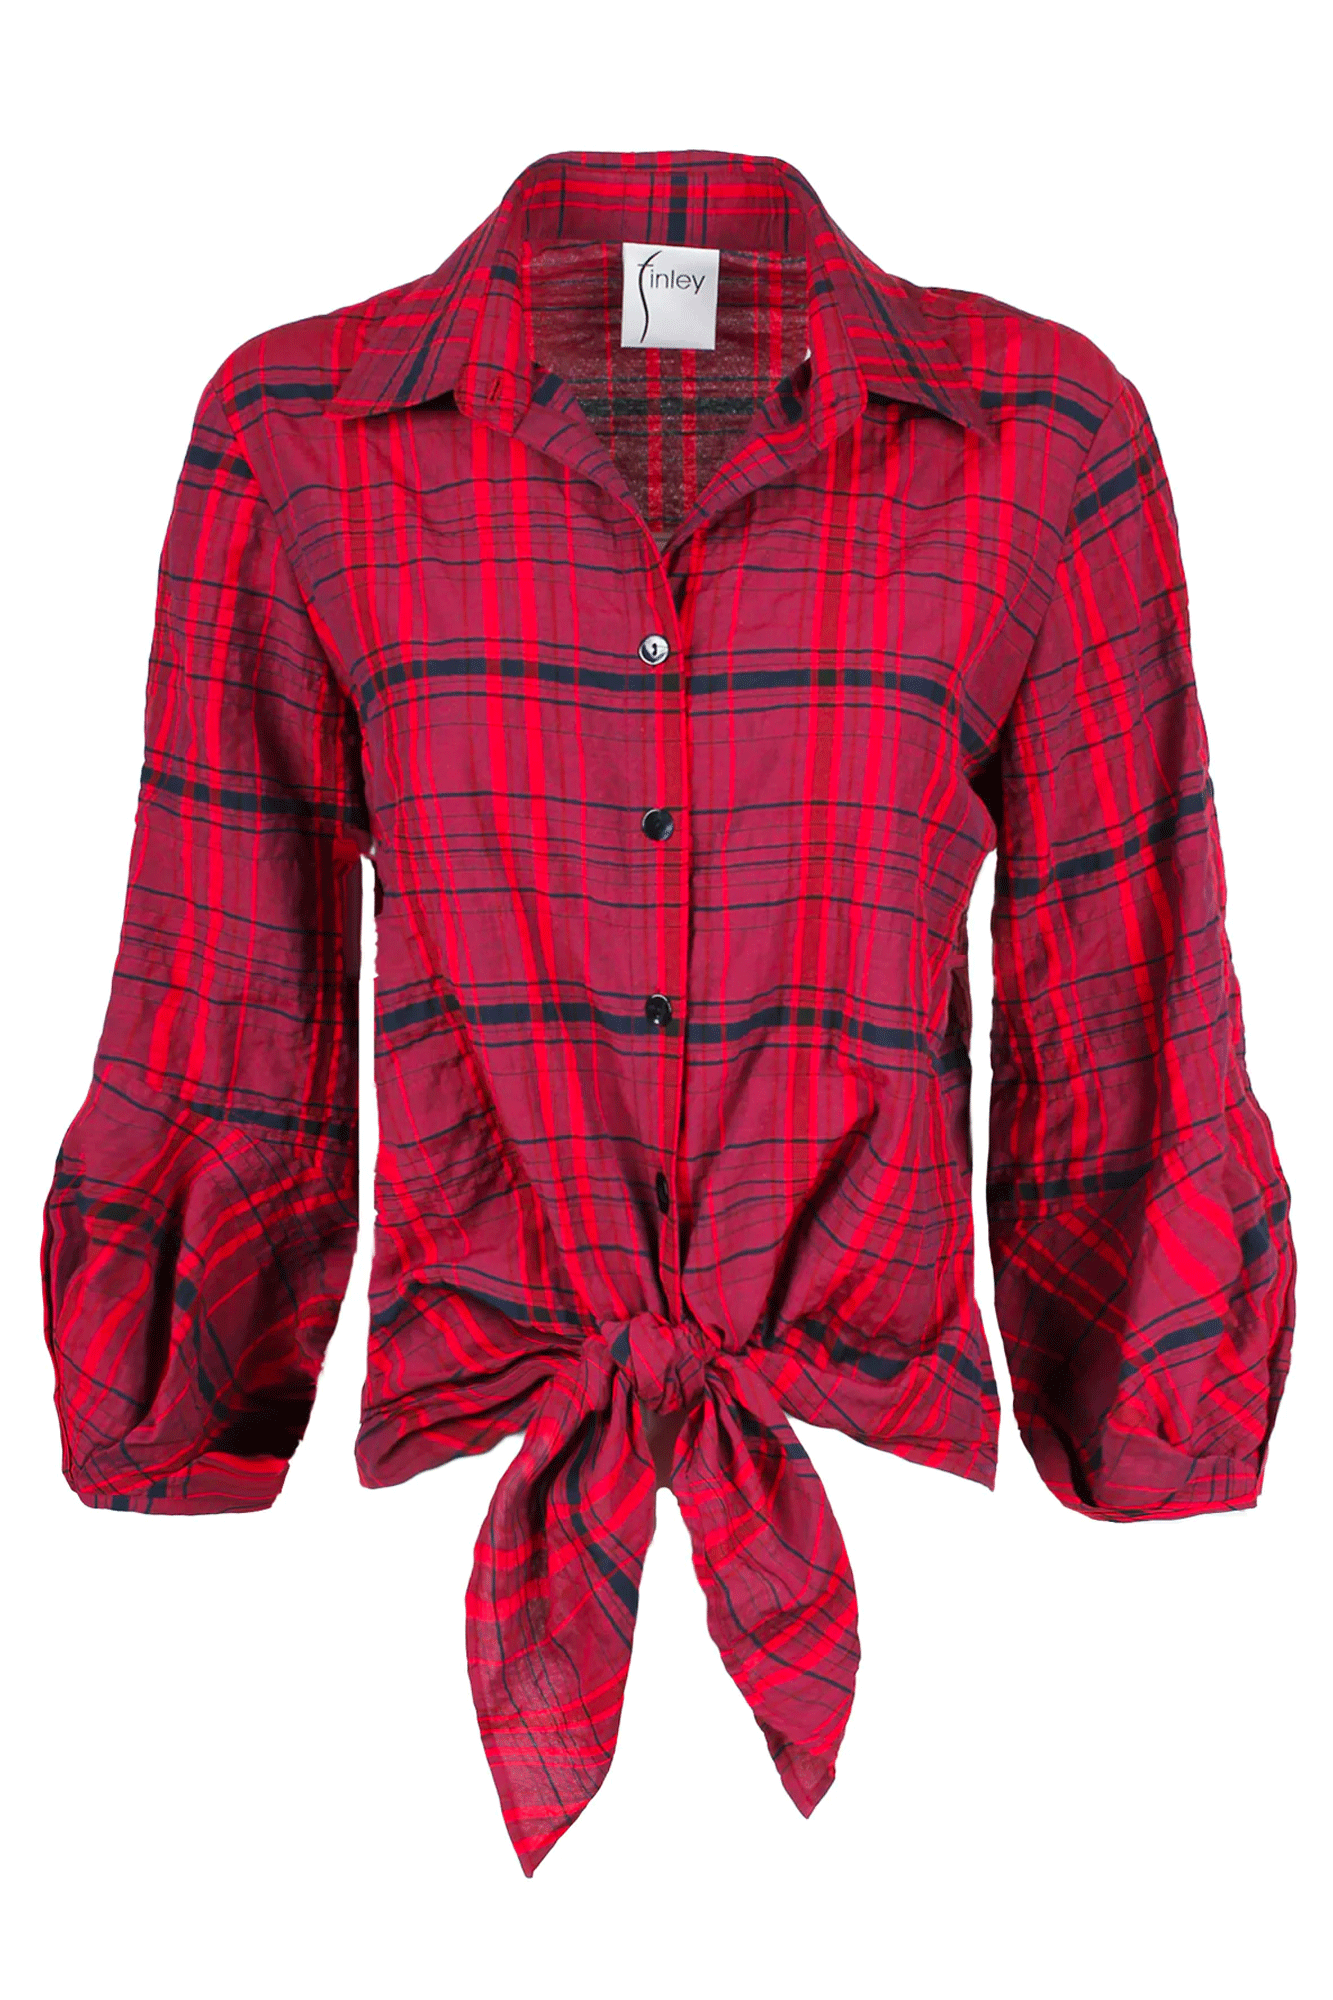 The Emmy Shirt from Finley offers a timeless look with a modern touch. Crafted from cranberry plaid fabric with tonal embroidery details, this shirt features a spread collar and button-front closure, plus a pleated cuff detail. The style has a relaxed fit and an approximate length of 23" from the shoulder to the hem. The front self-tie hem adds a fashionable element to the classic look.